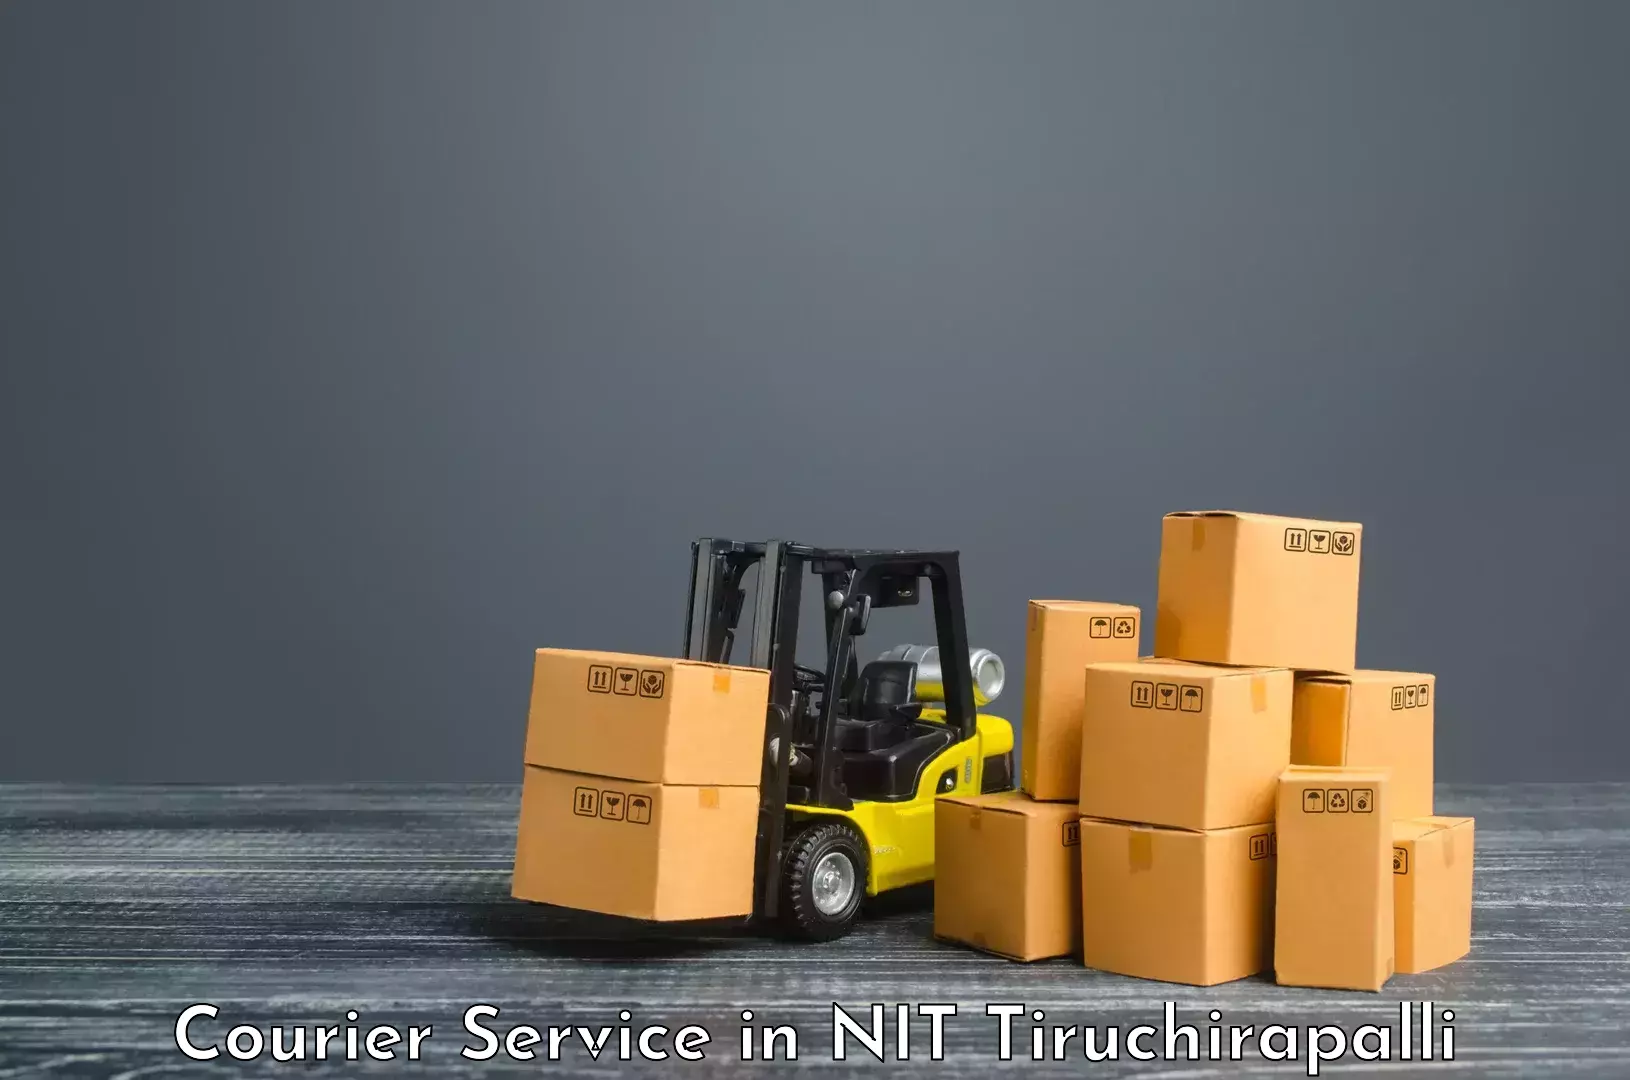 Personal courier services in NIT Tiruchirapalli